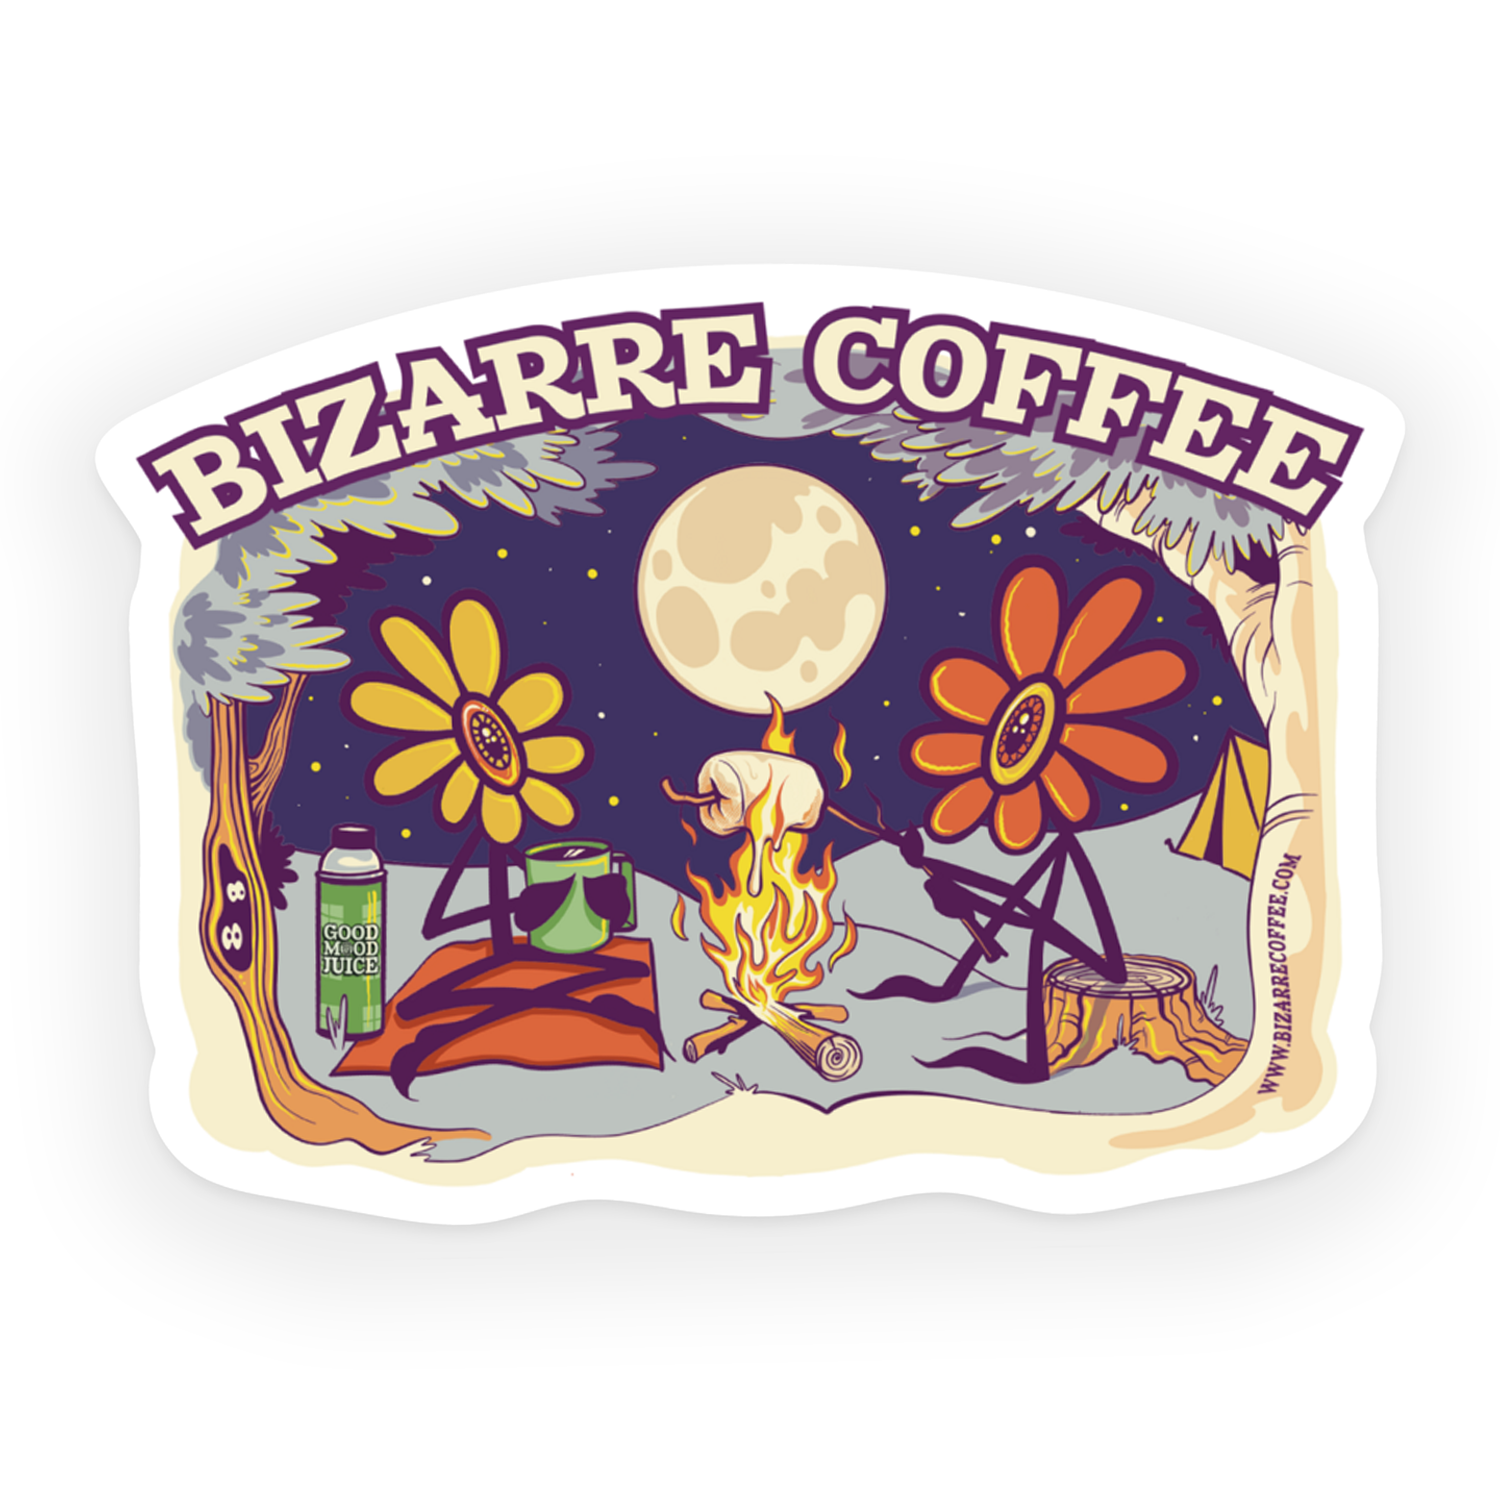 A custom designed Bizarre Coffee sticker featuring two flowers roasting marshmallows while sipping coffee.